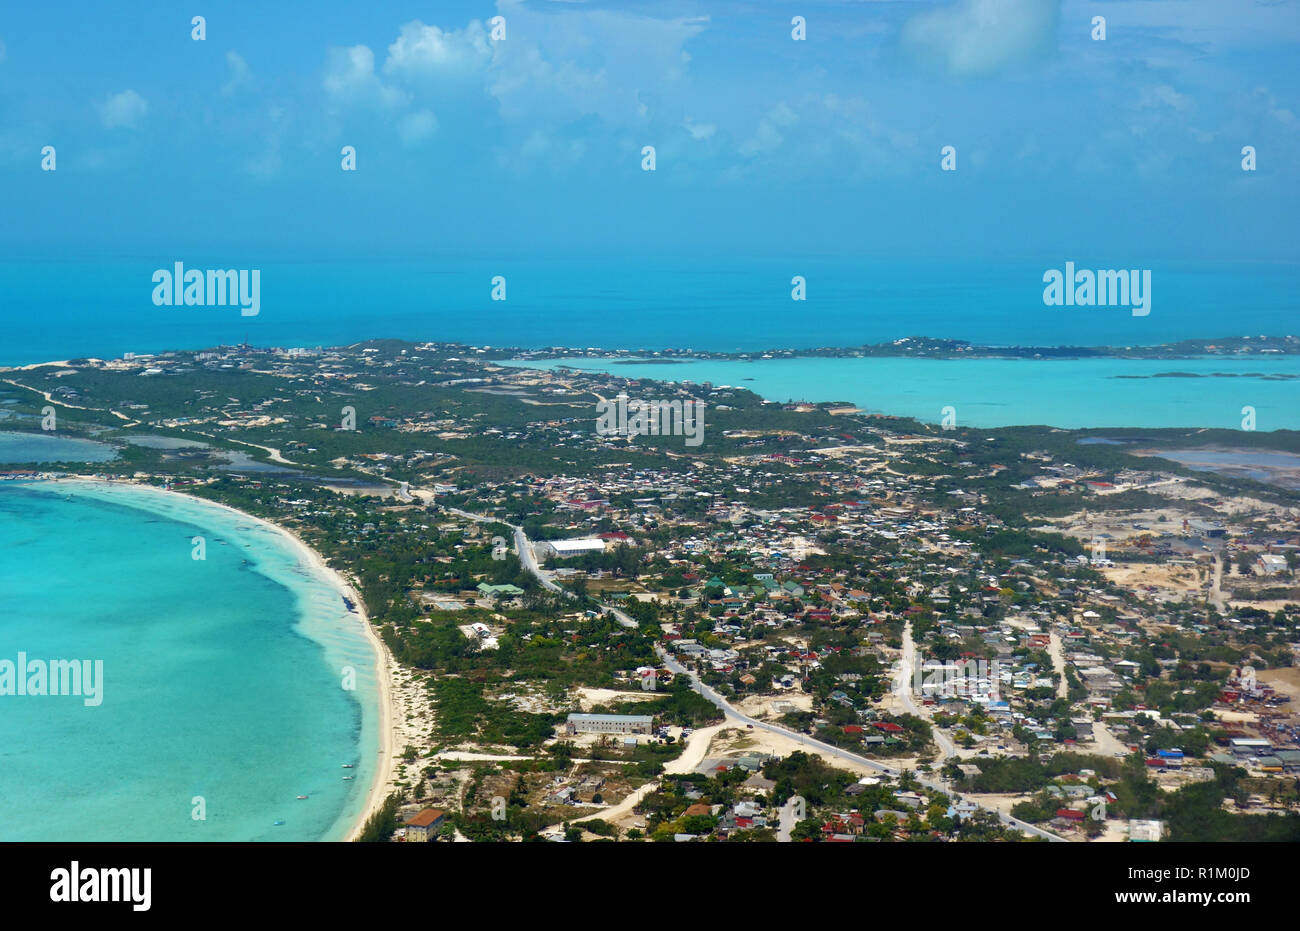 PROVIDENCIALES, TURKS AND CAICOS -8 JUL 2017- Aerial view of the island of Providenciales (Provo) in the Turks and Caicos. Stock Photo